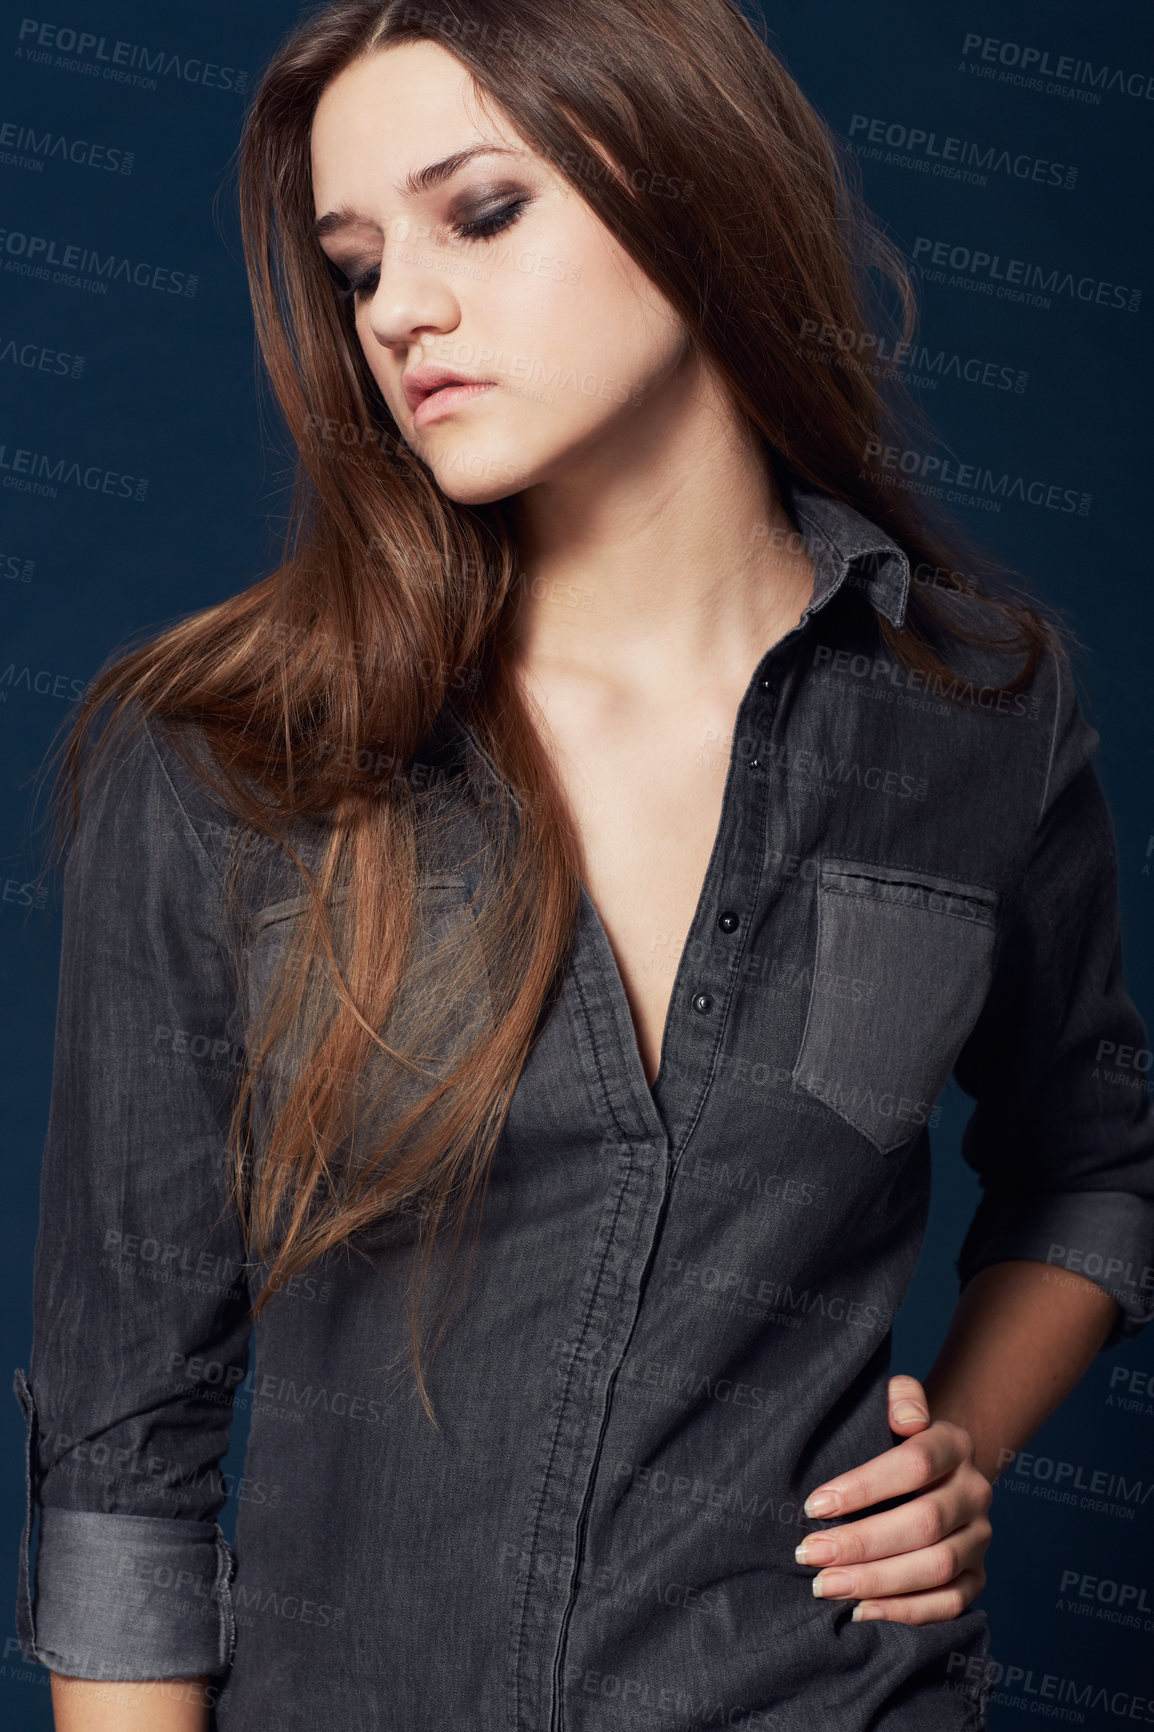 Buy stock photo A pretty young model flaunting her style and looks in studio